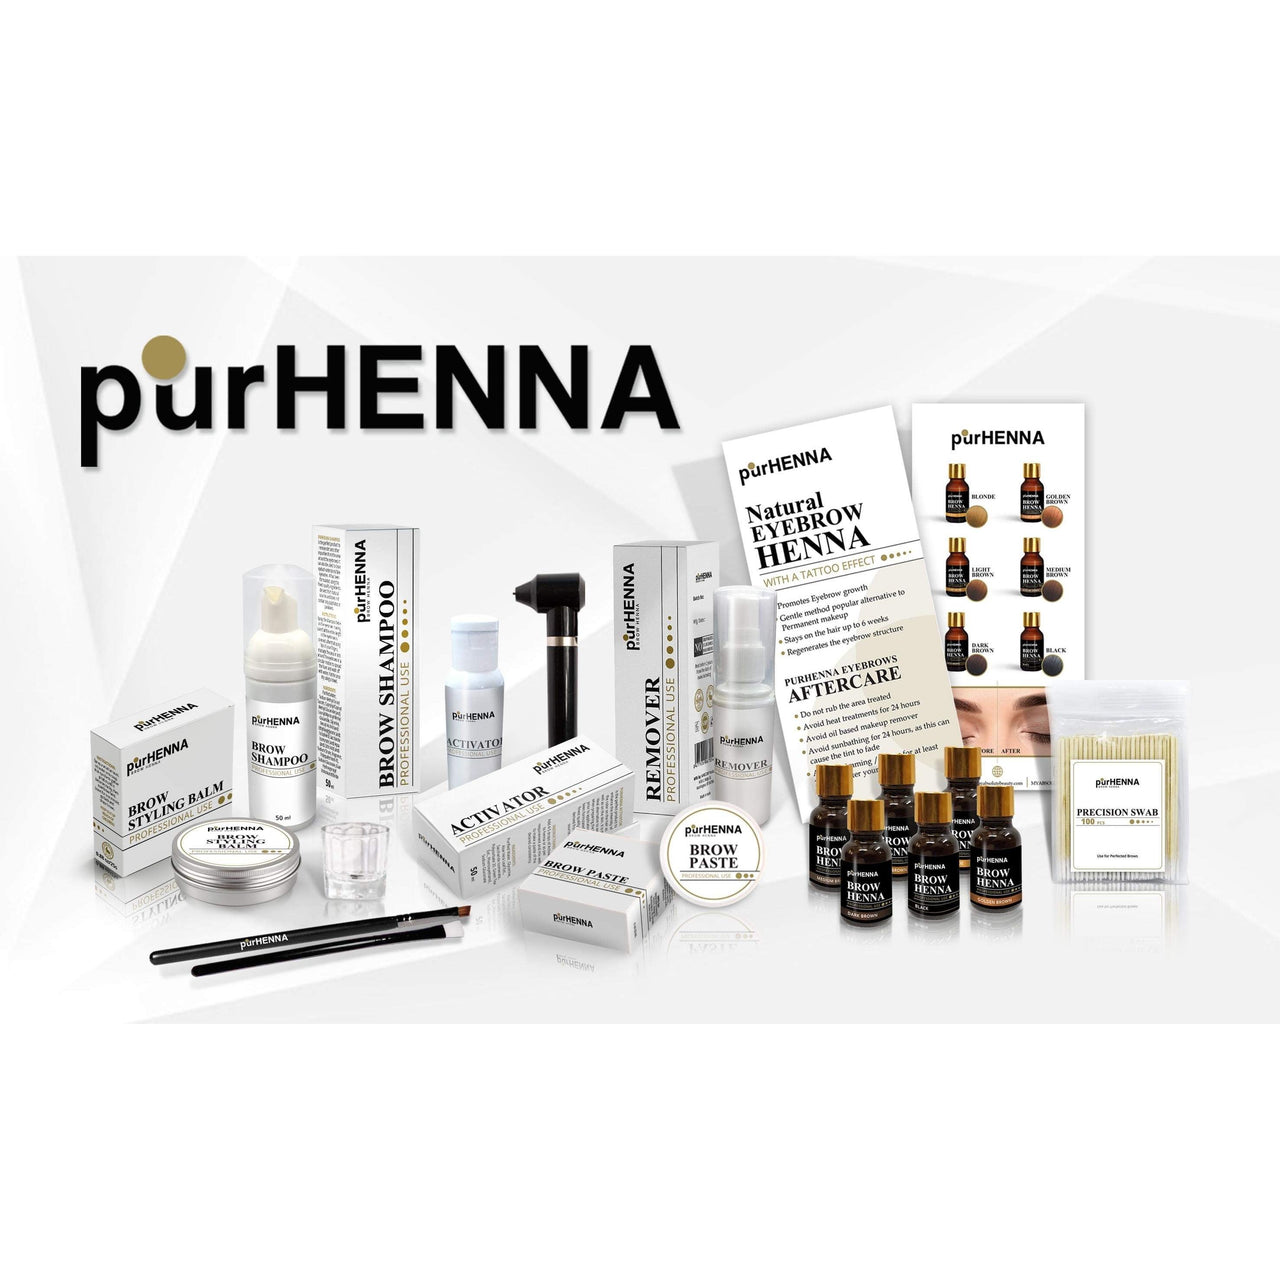 purHENNA® | brow henna | kit, manual and certificate- Online Training